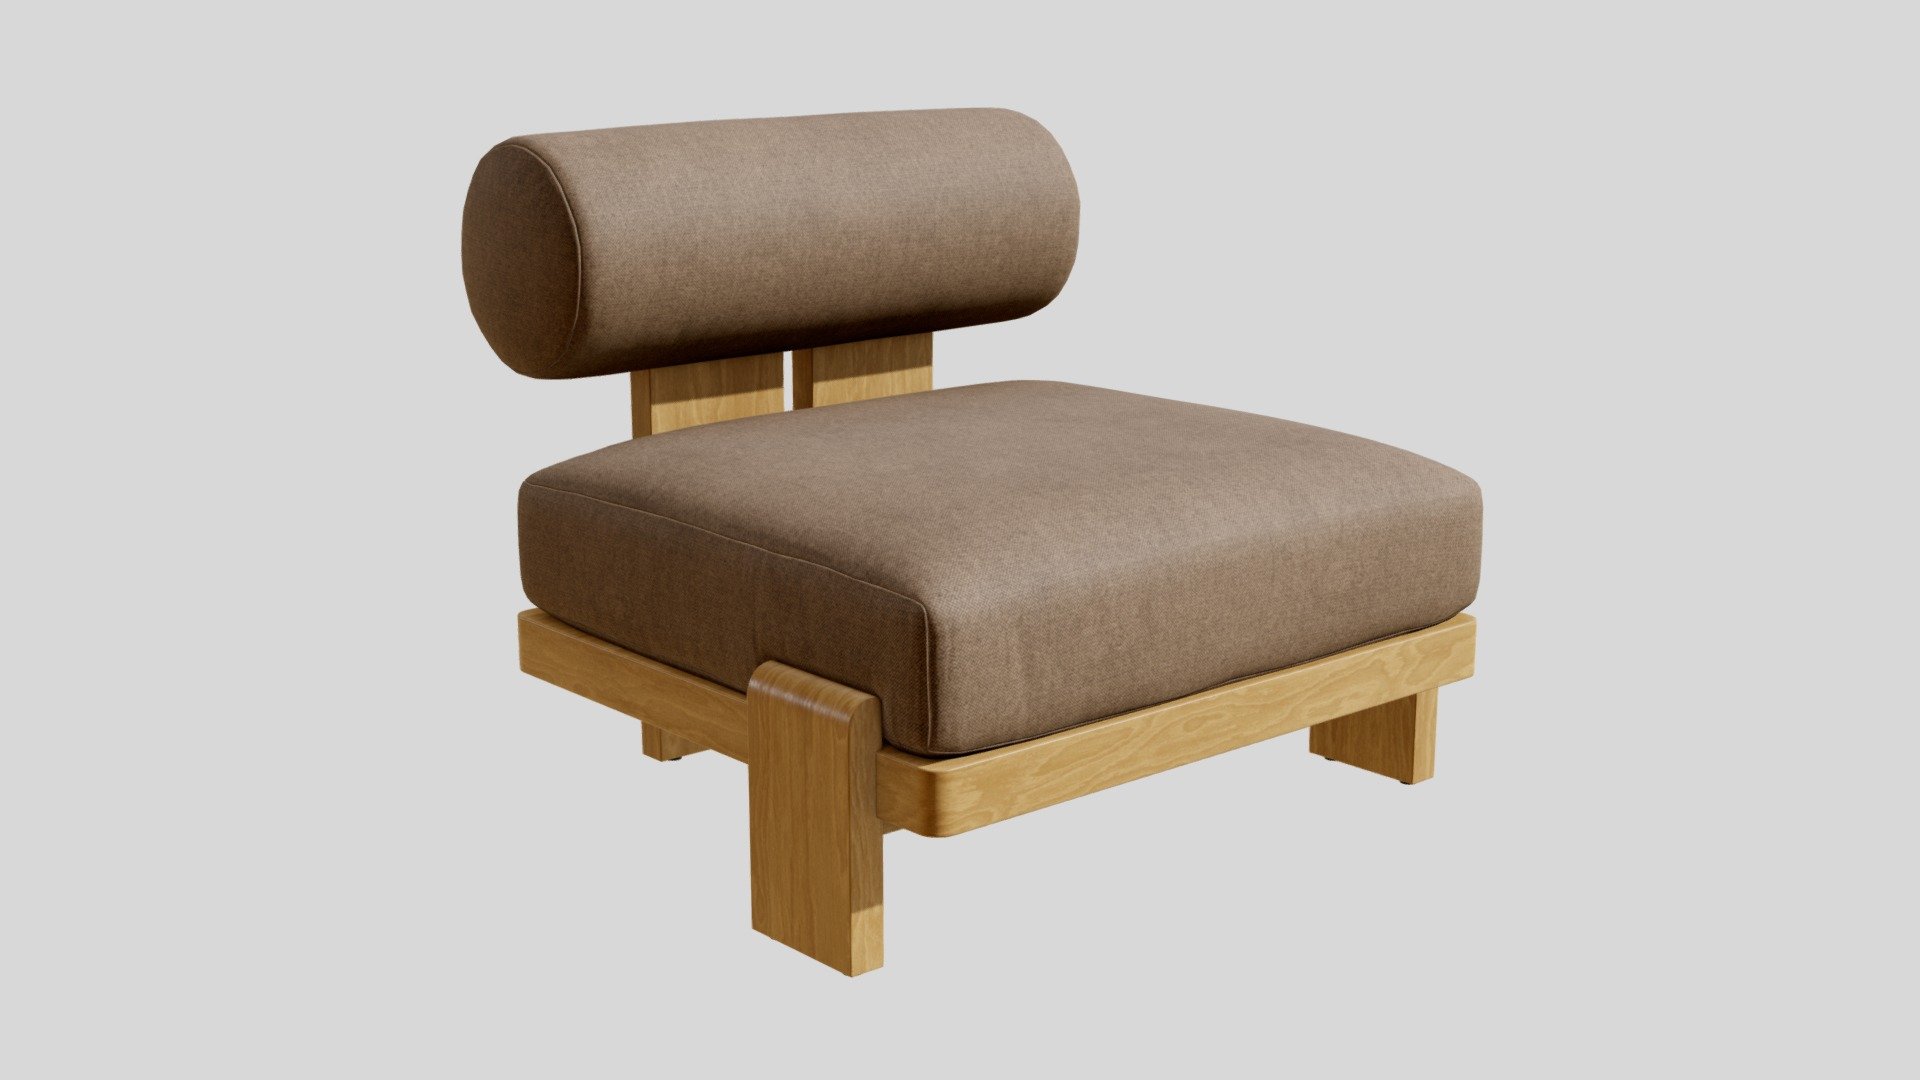 High-quality 3d model of a Restoration Hardware Vigo Teak Lounge Chair - Restoration Hardware Vigo Armchair - Buy Royalty Free 3D model by 3detto 3d model